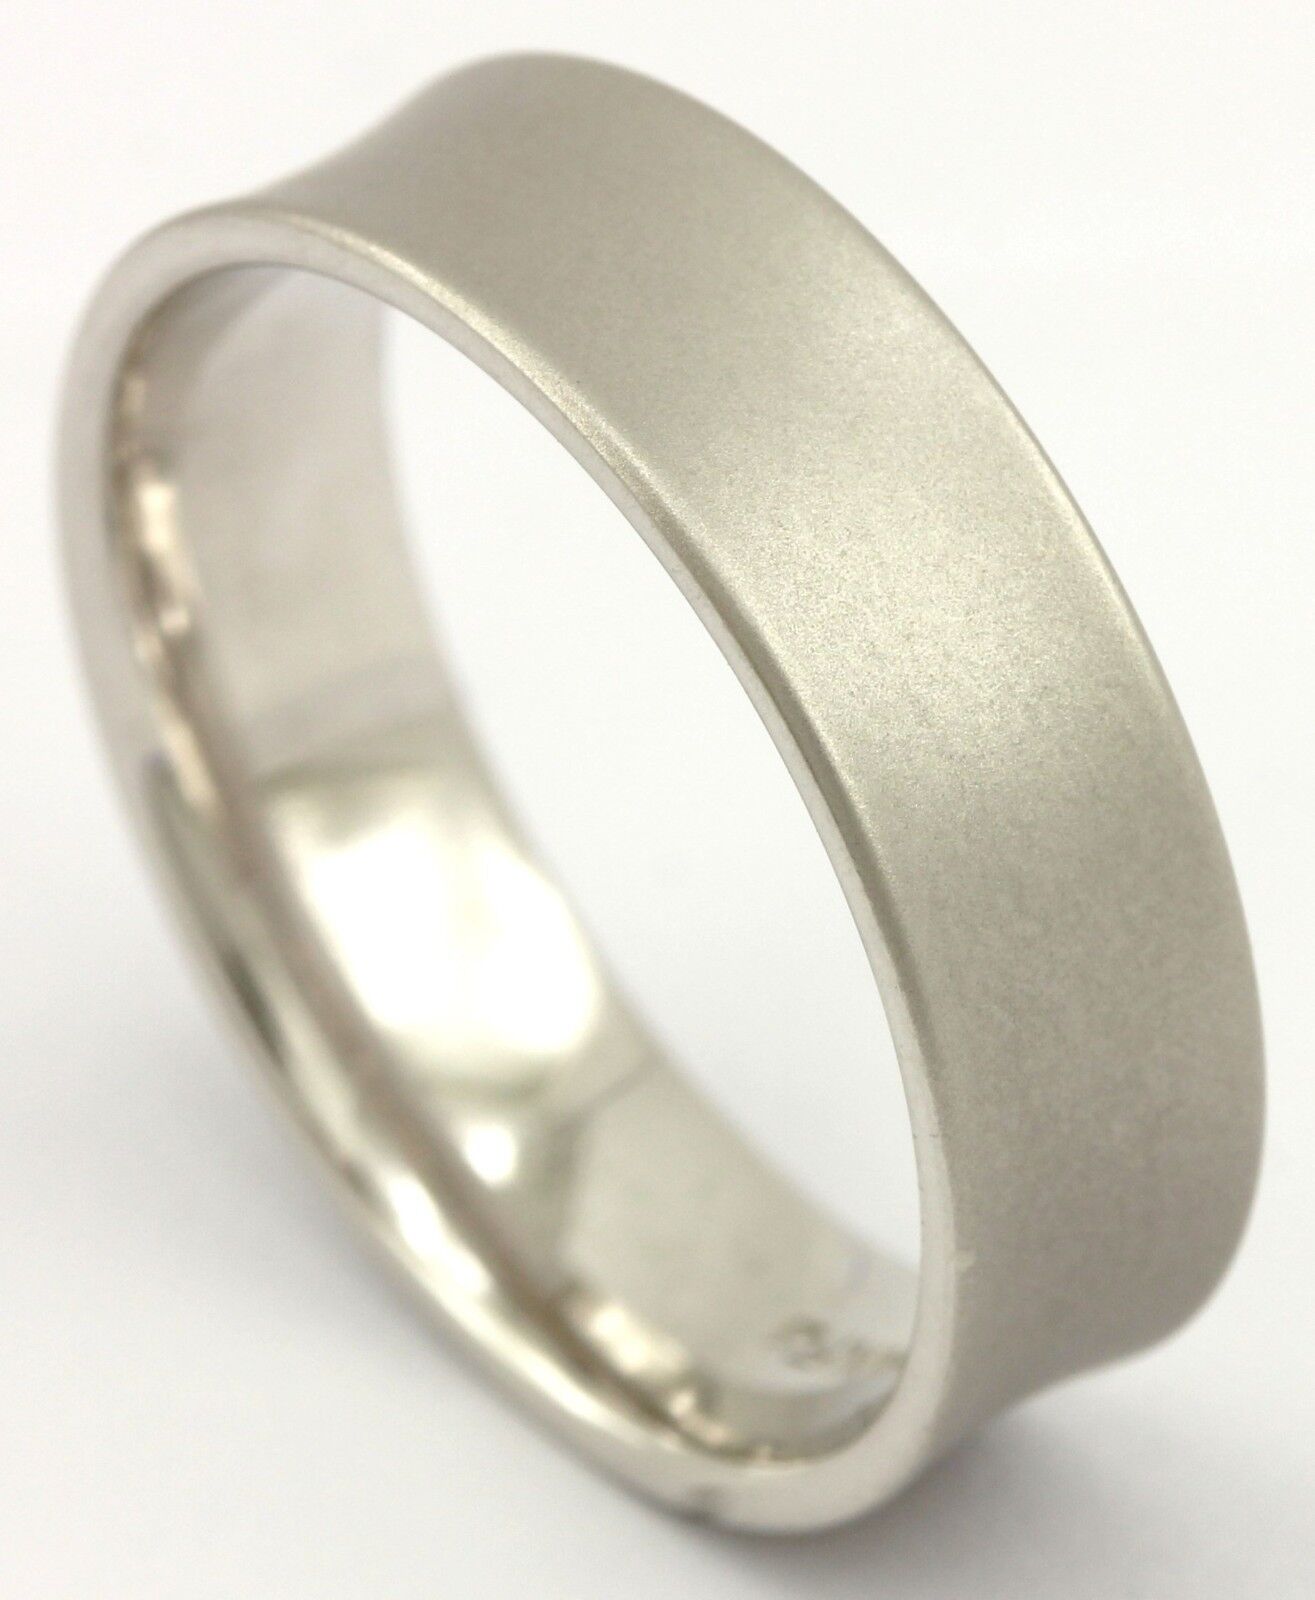 Men's Wedding Band Rings – Finer Jewelry, Inc.